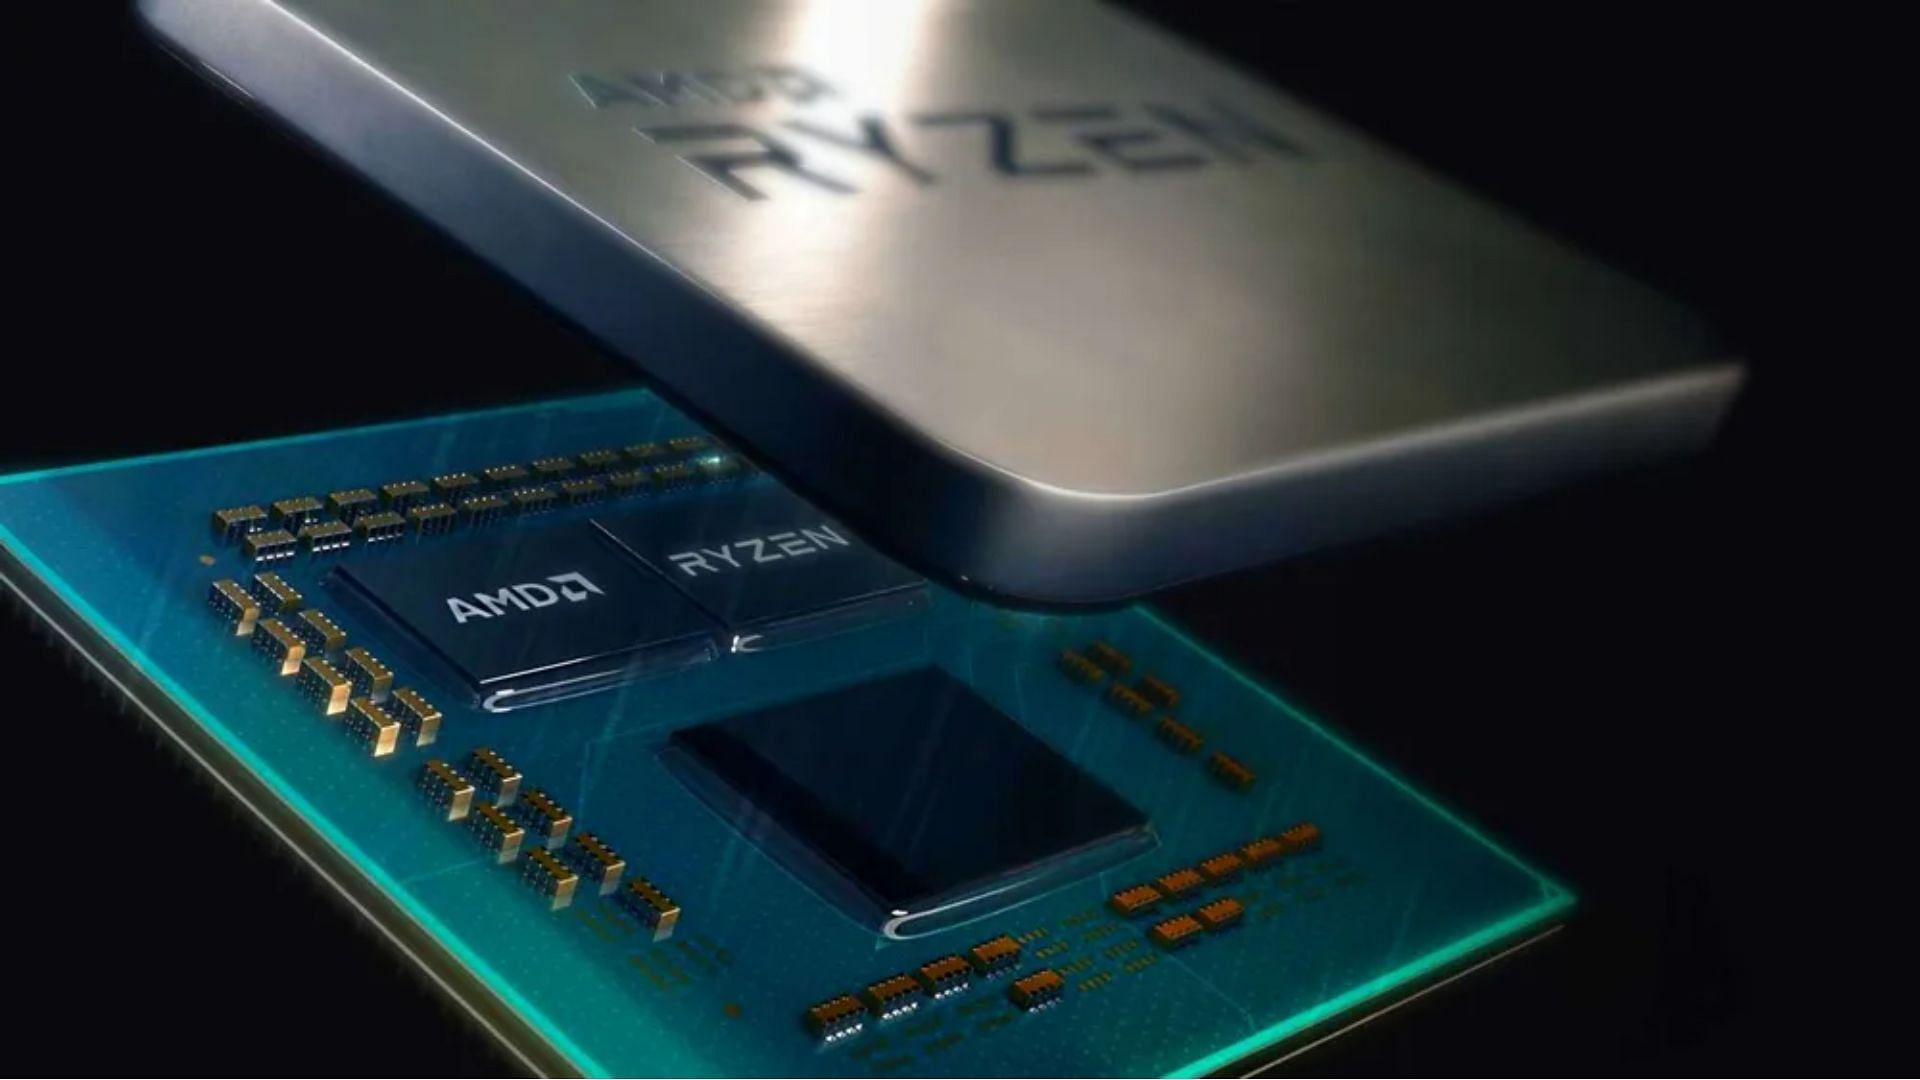 The AMD Ryzen 7 5700G and 8700G are powered by the chiplet design (Image via AMD)